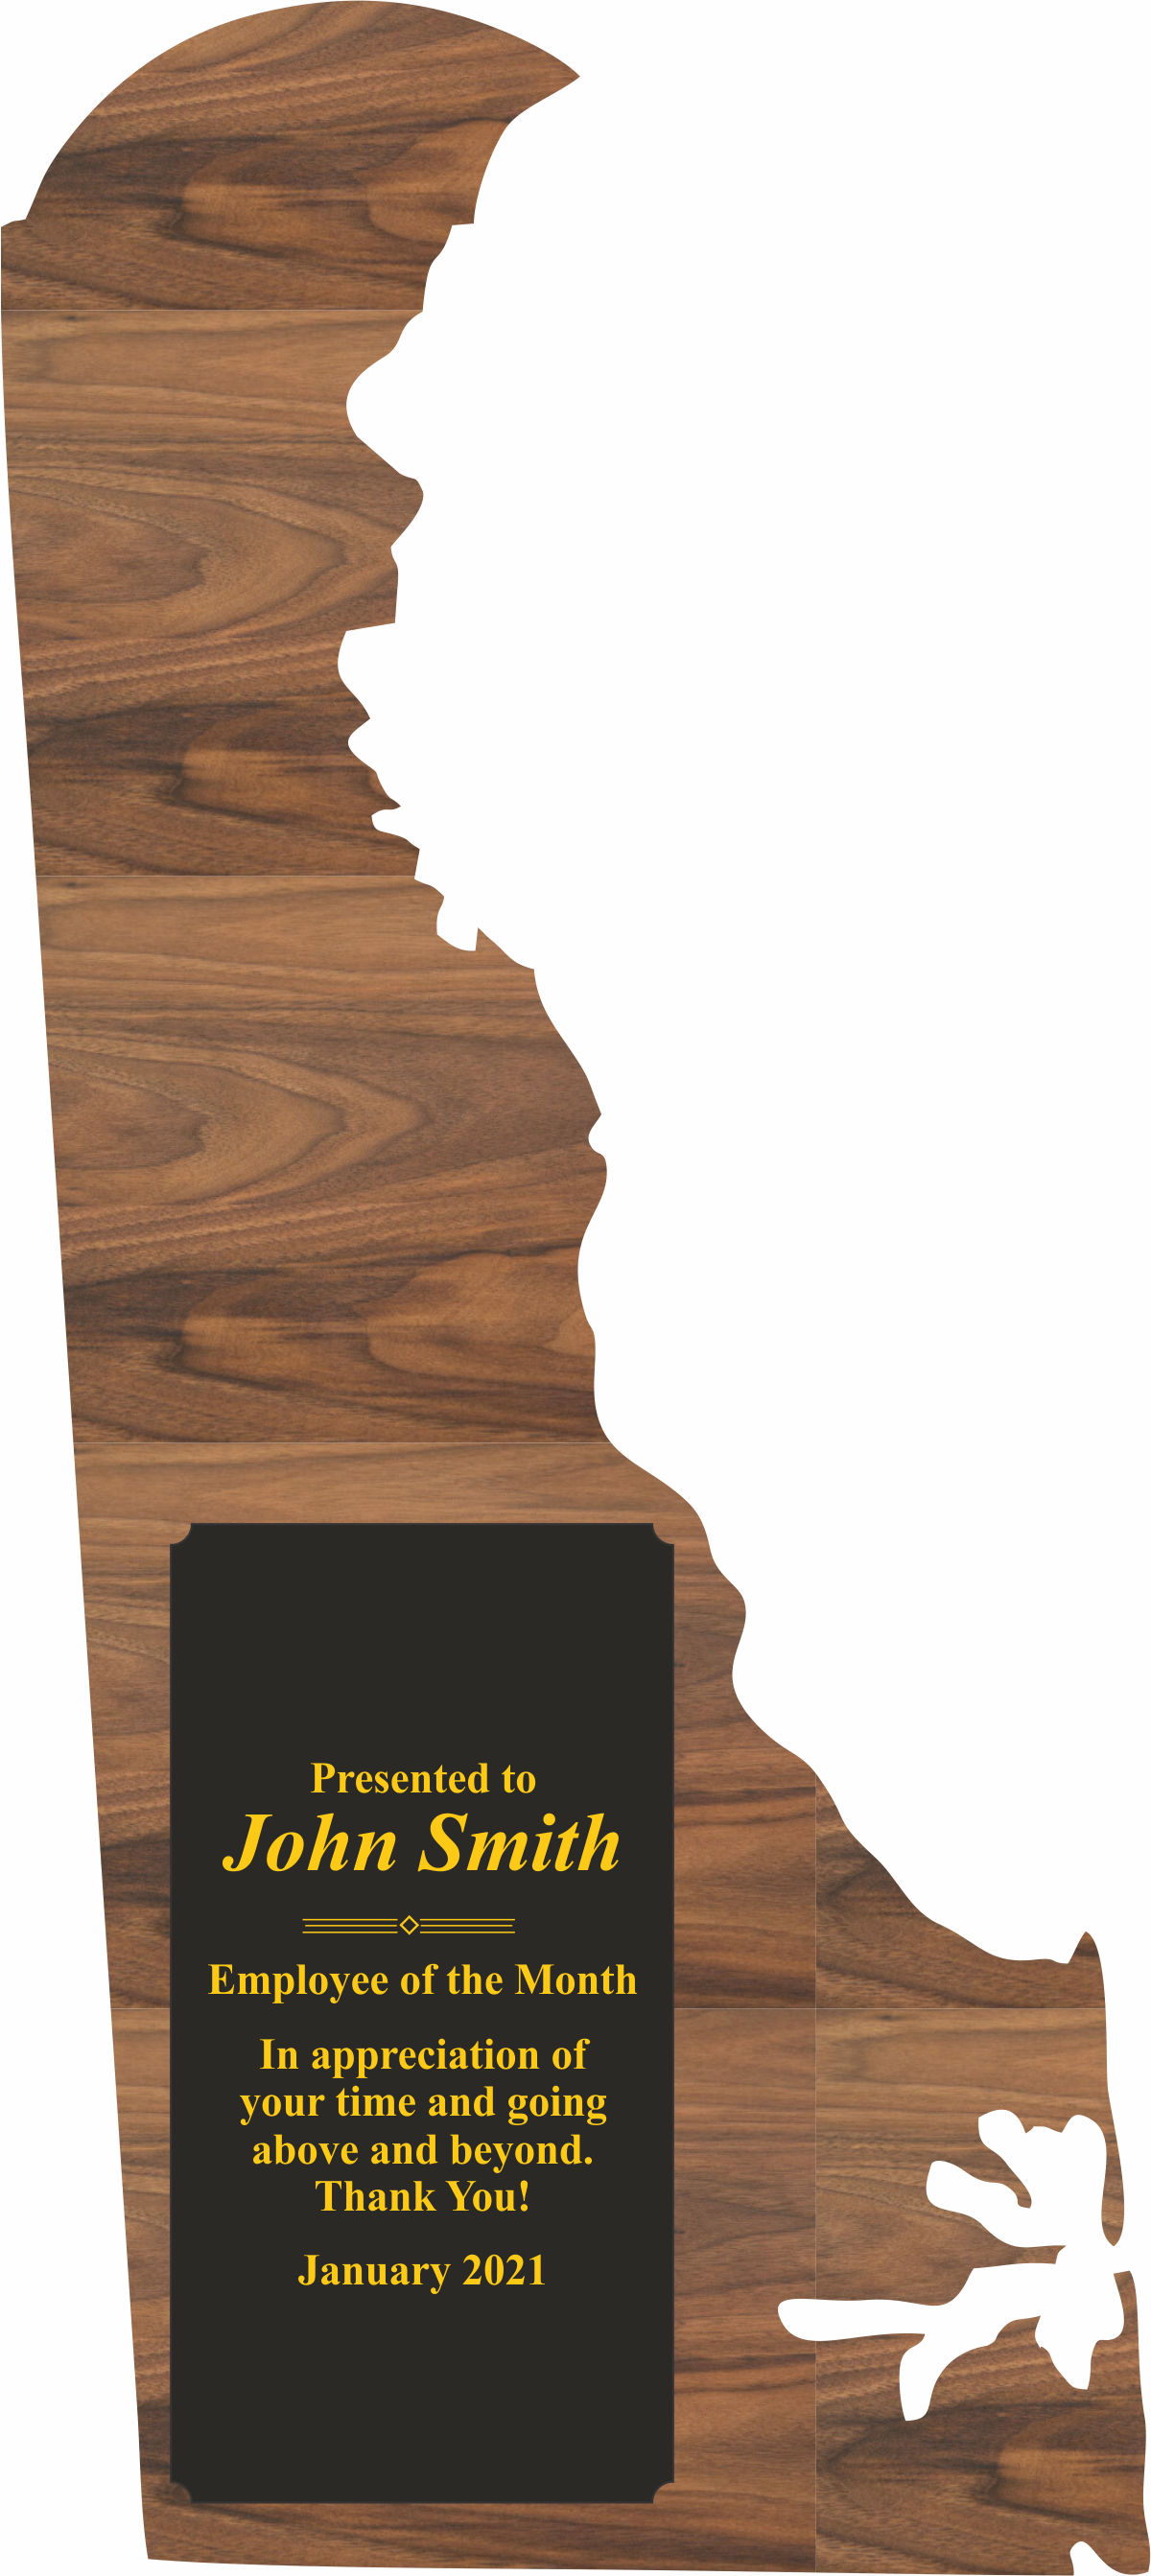 Custom Printed Delaware State Shaped Plaques